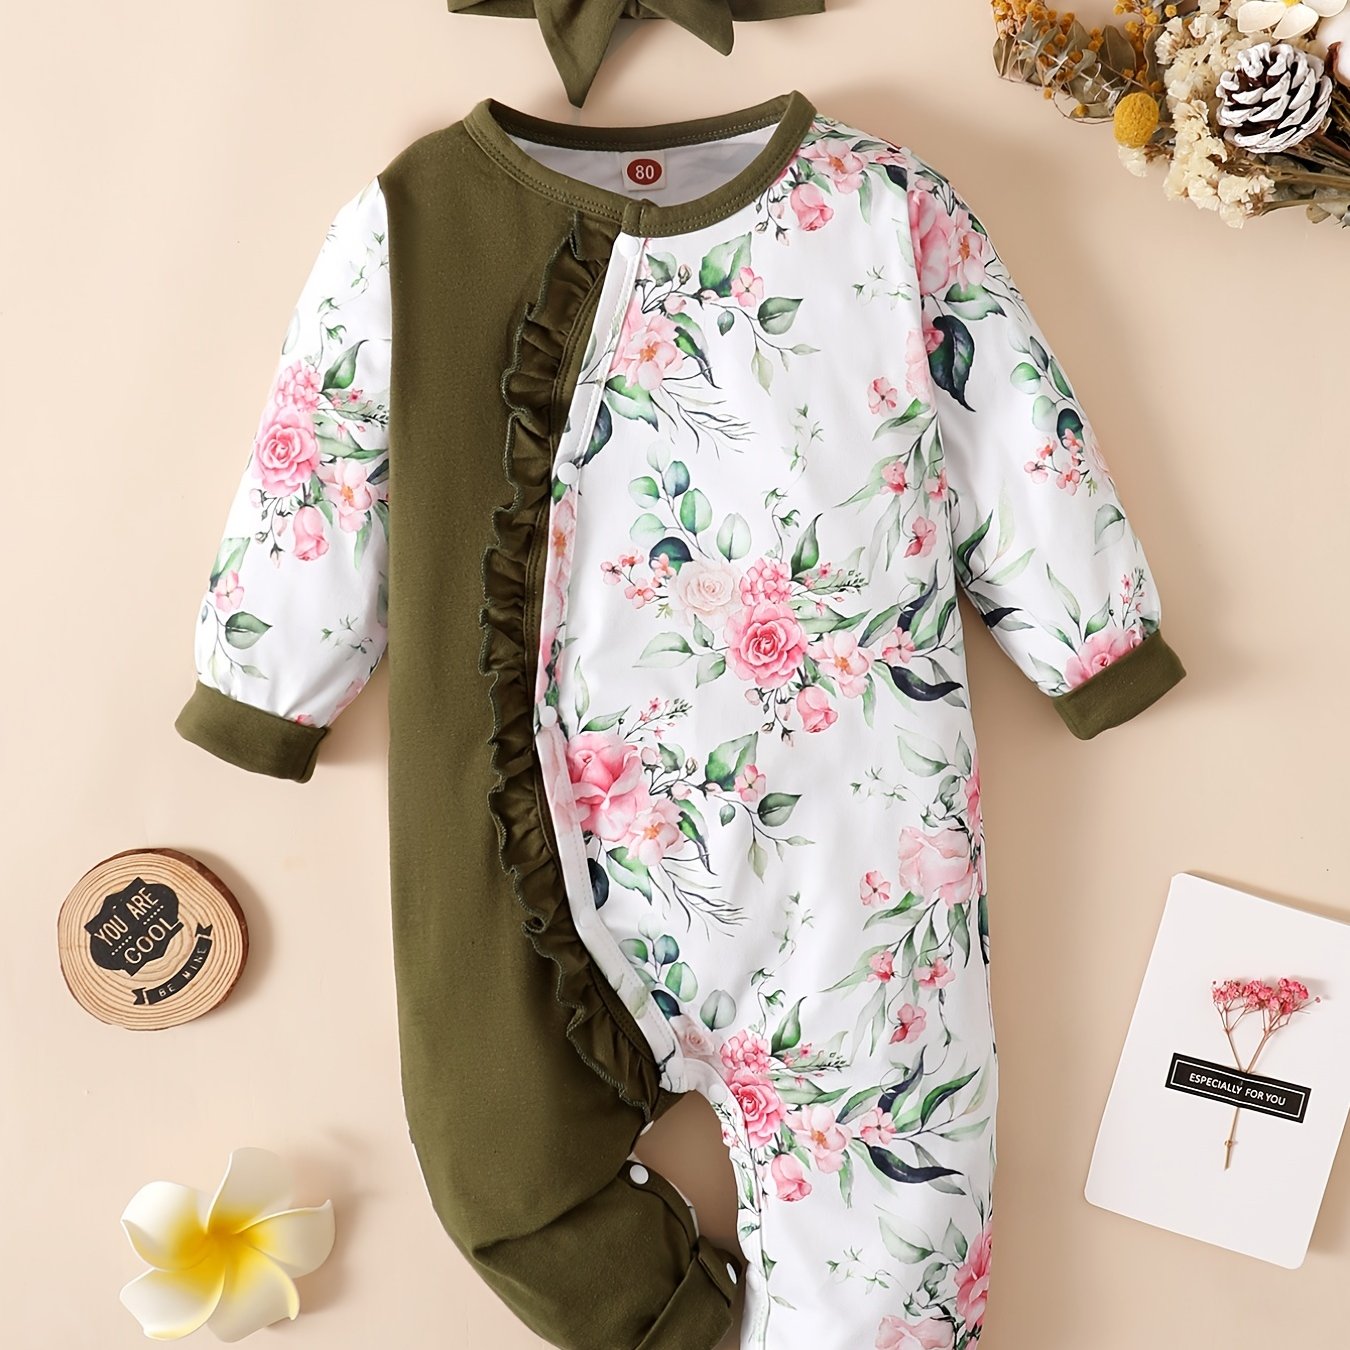 Newborn Infant Ruffle Romper with Floral Print